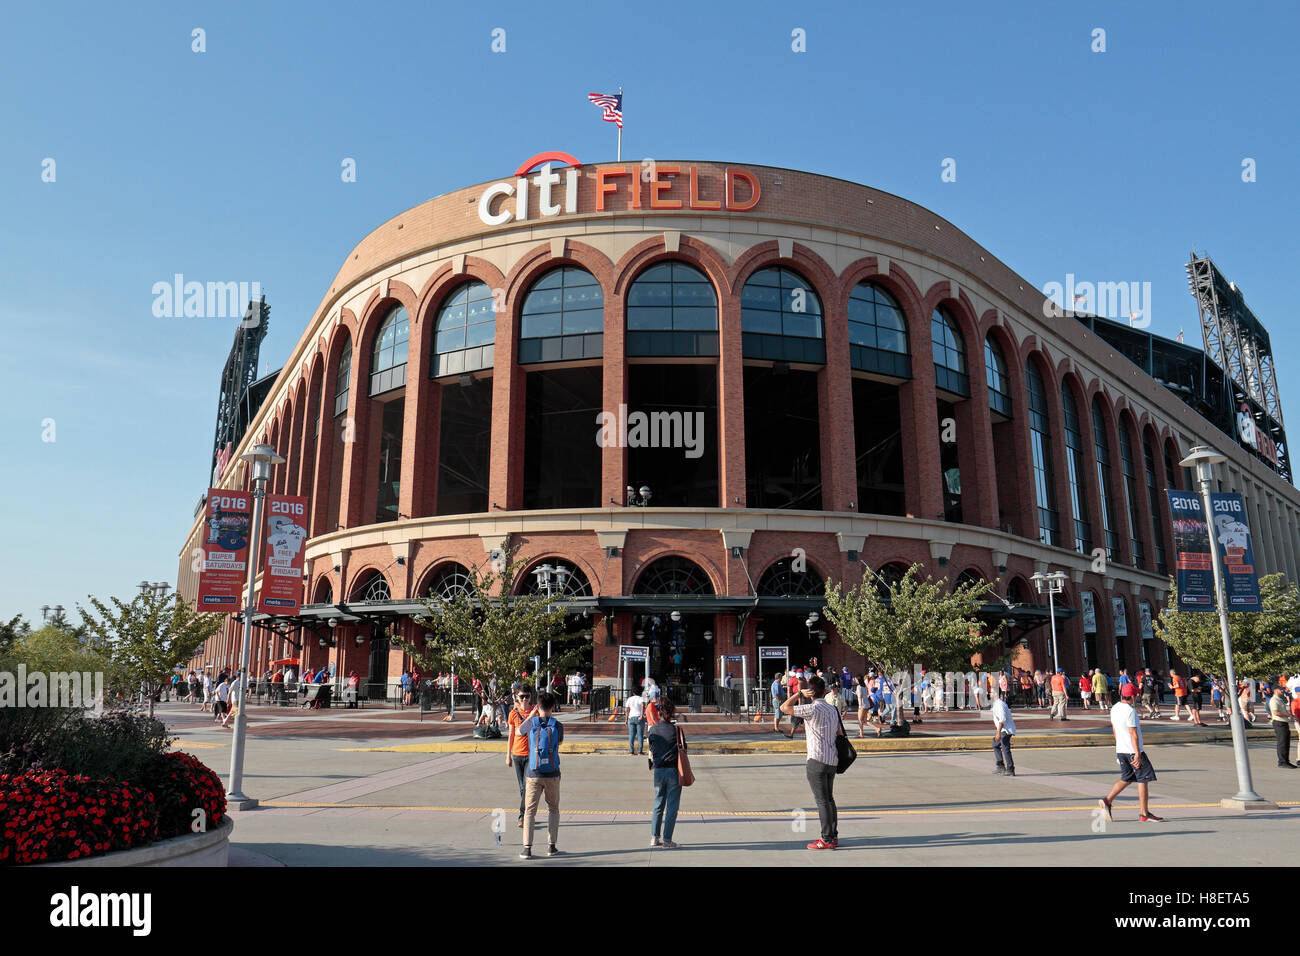 Exterior view of Citi Field, the home stadium of the MLB New York Mets before a 2016 game, New York, United States. Stock Photo